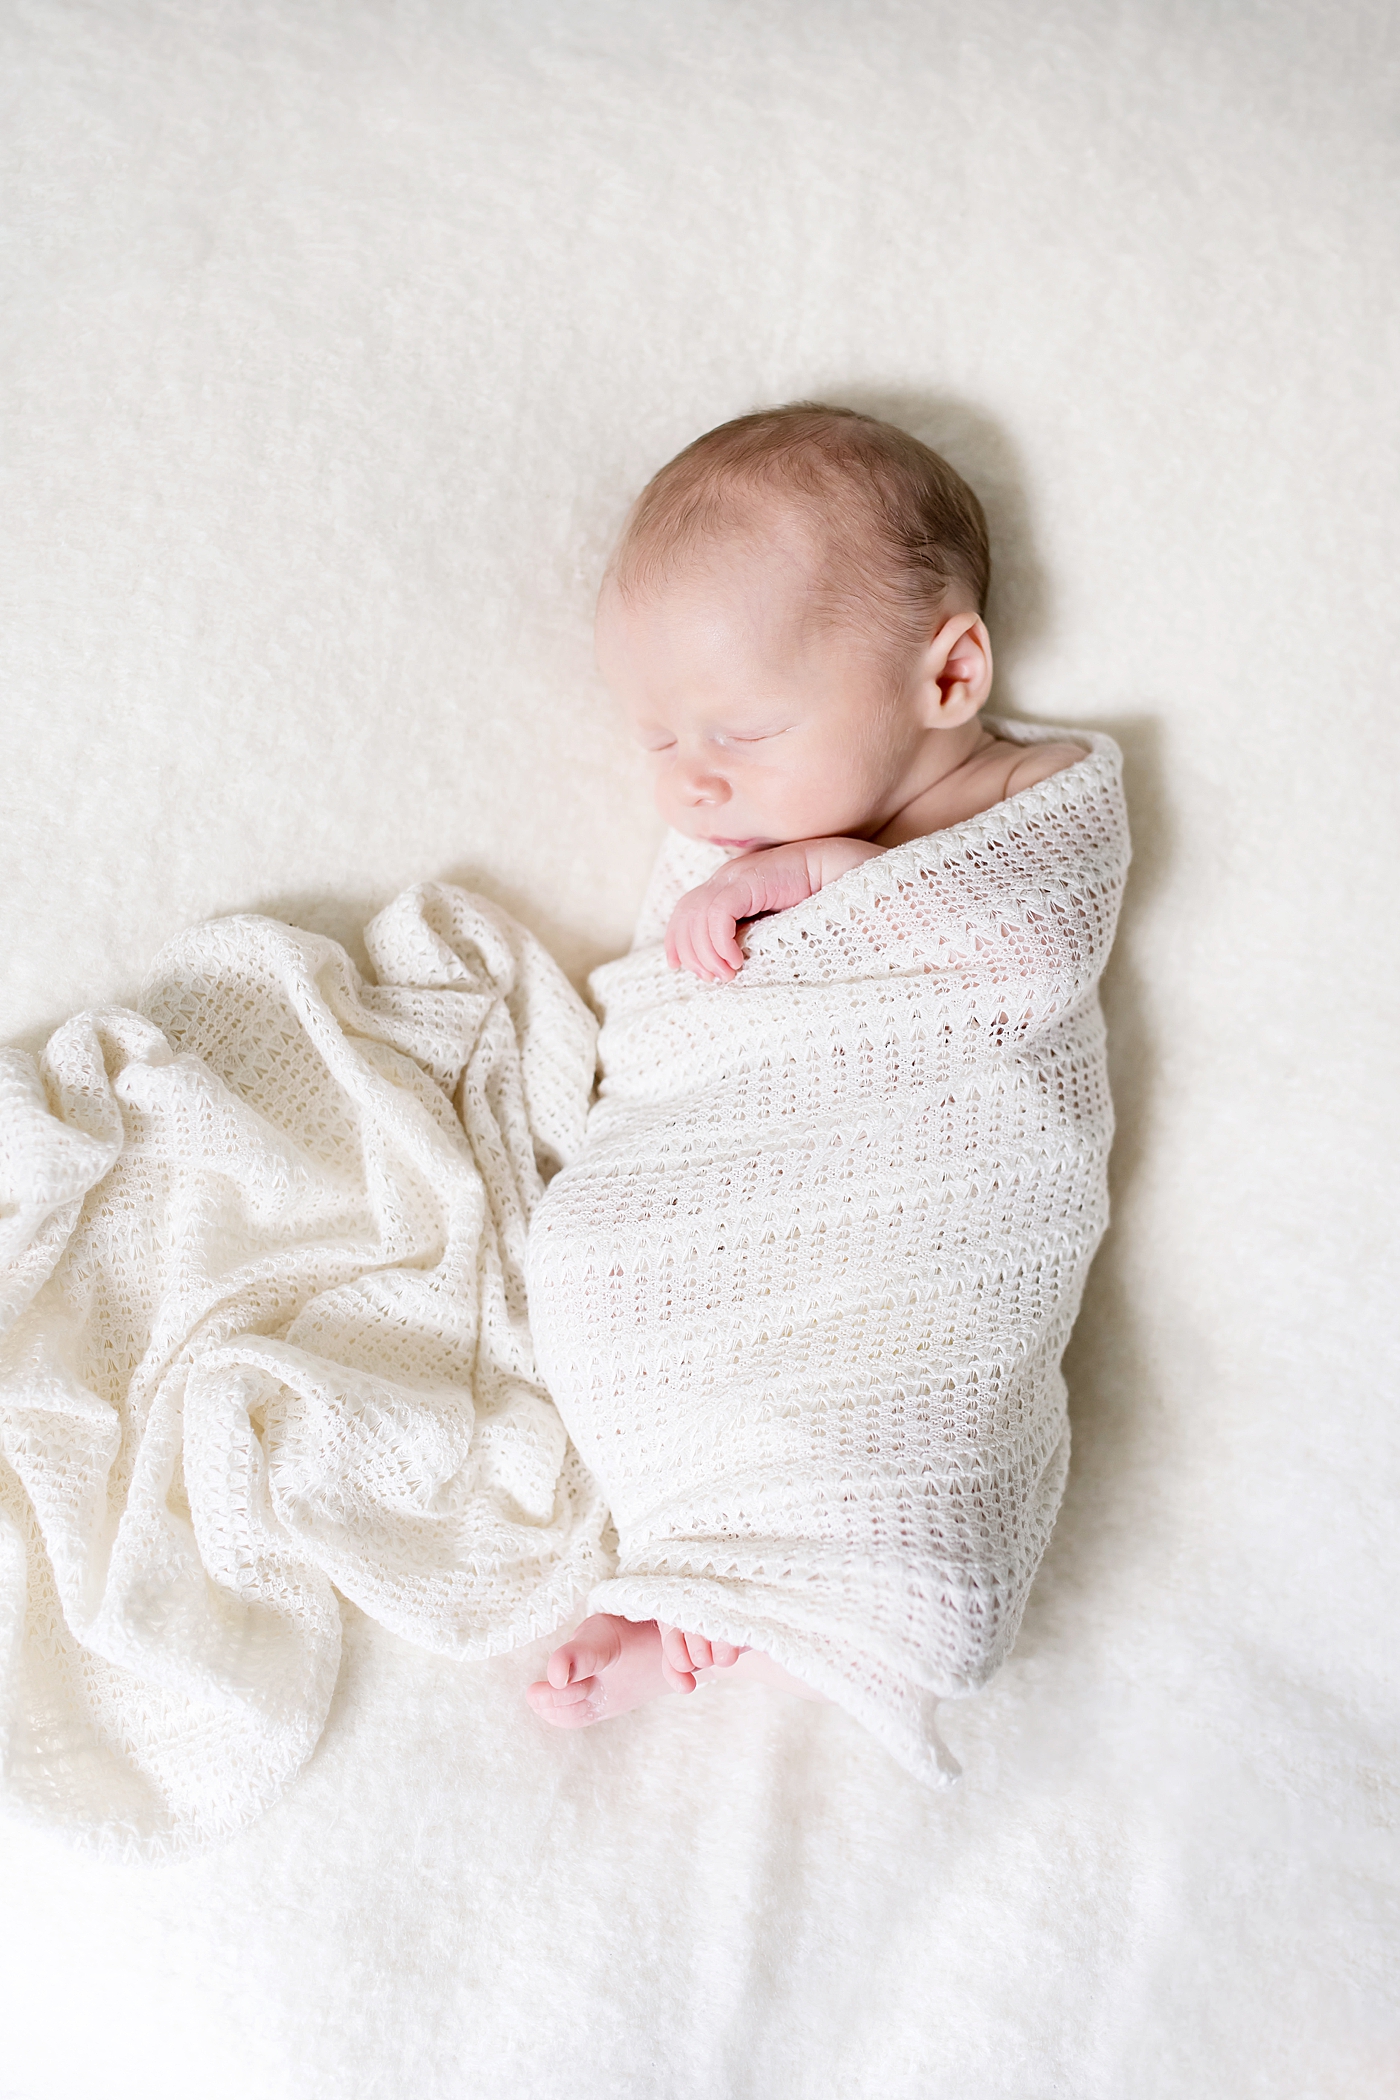 Baby boy wrapped in knitted white swaddle | Photo by Anna Wisjo